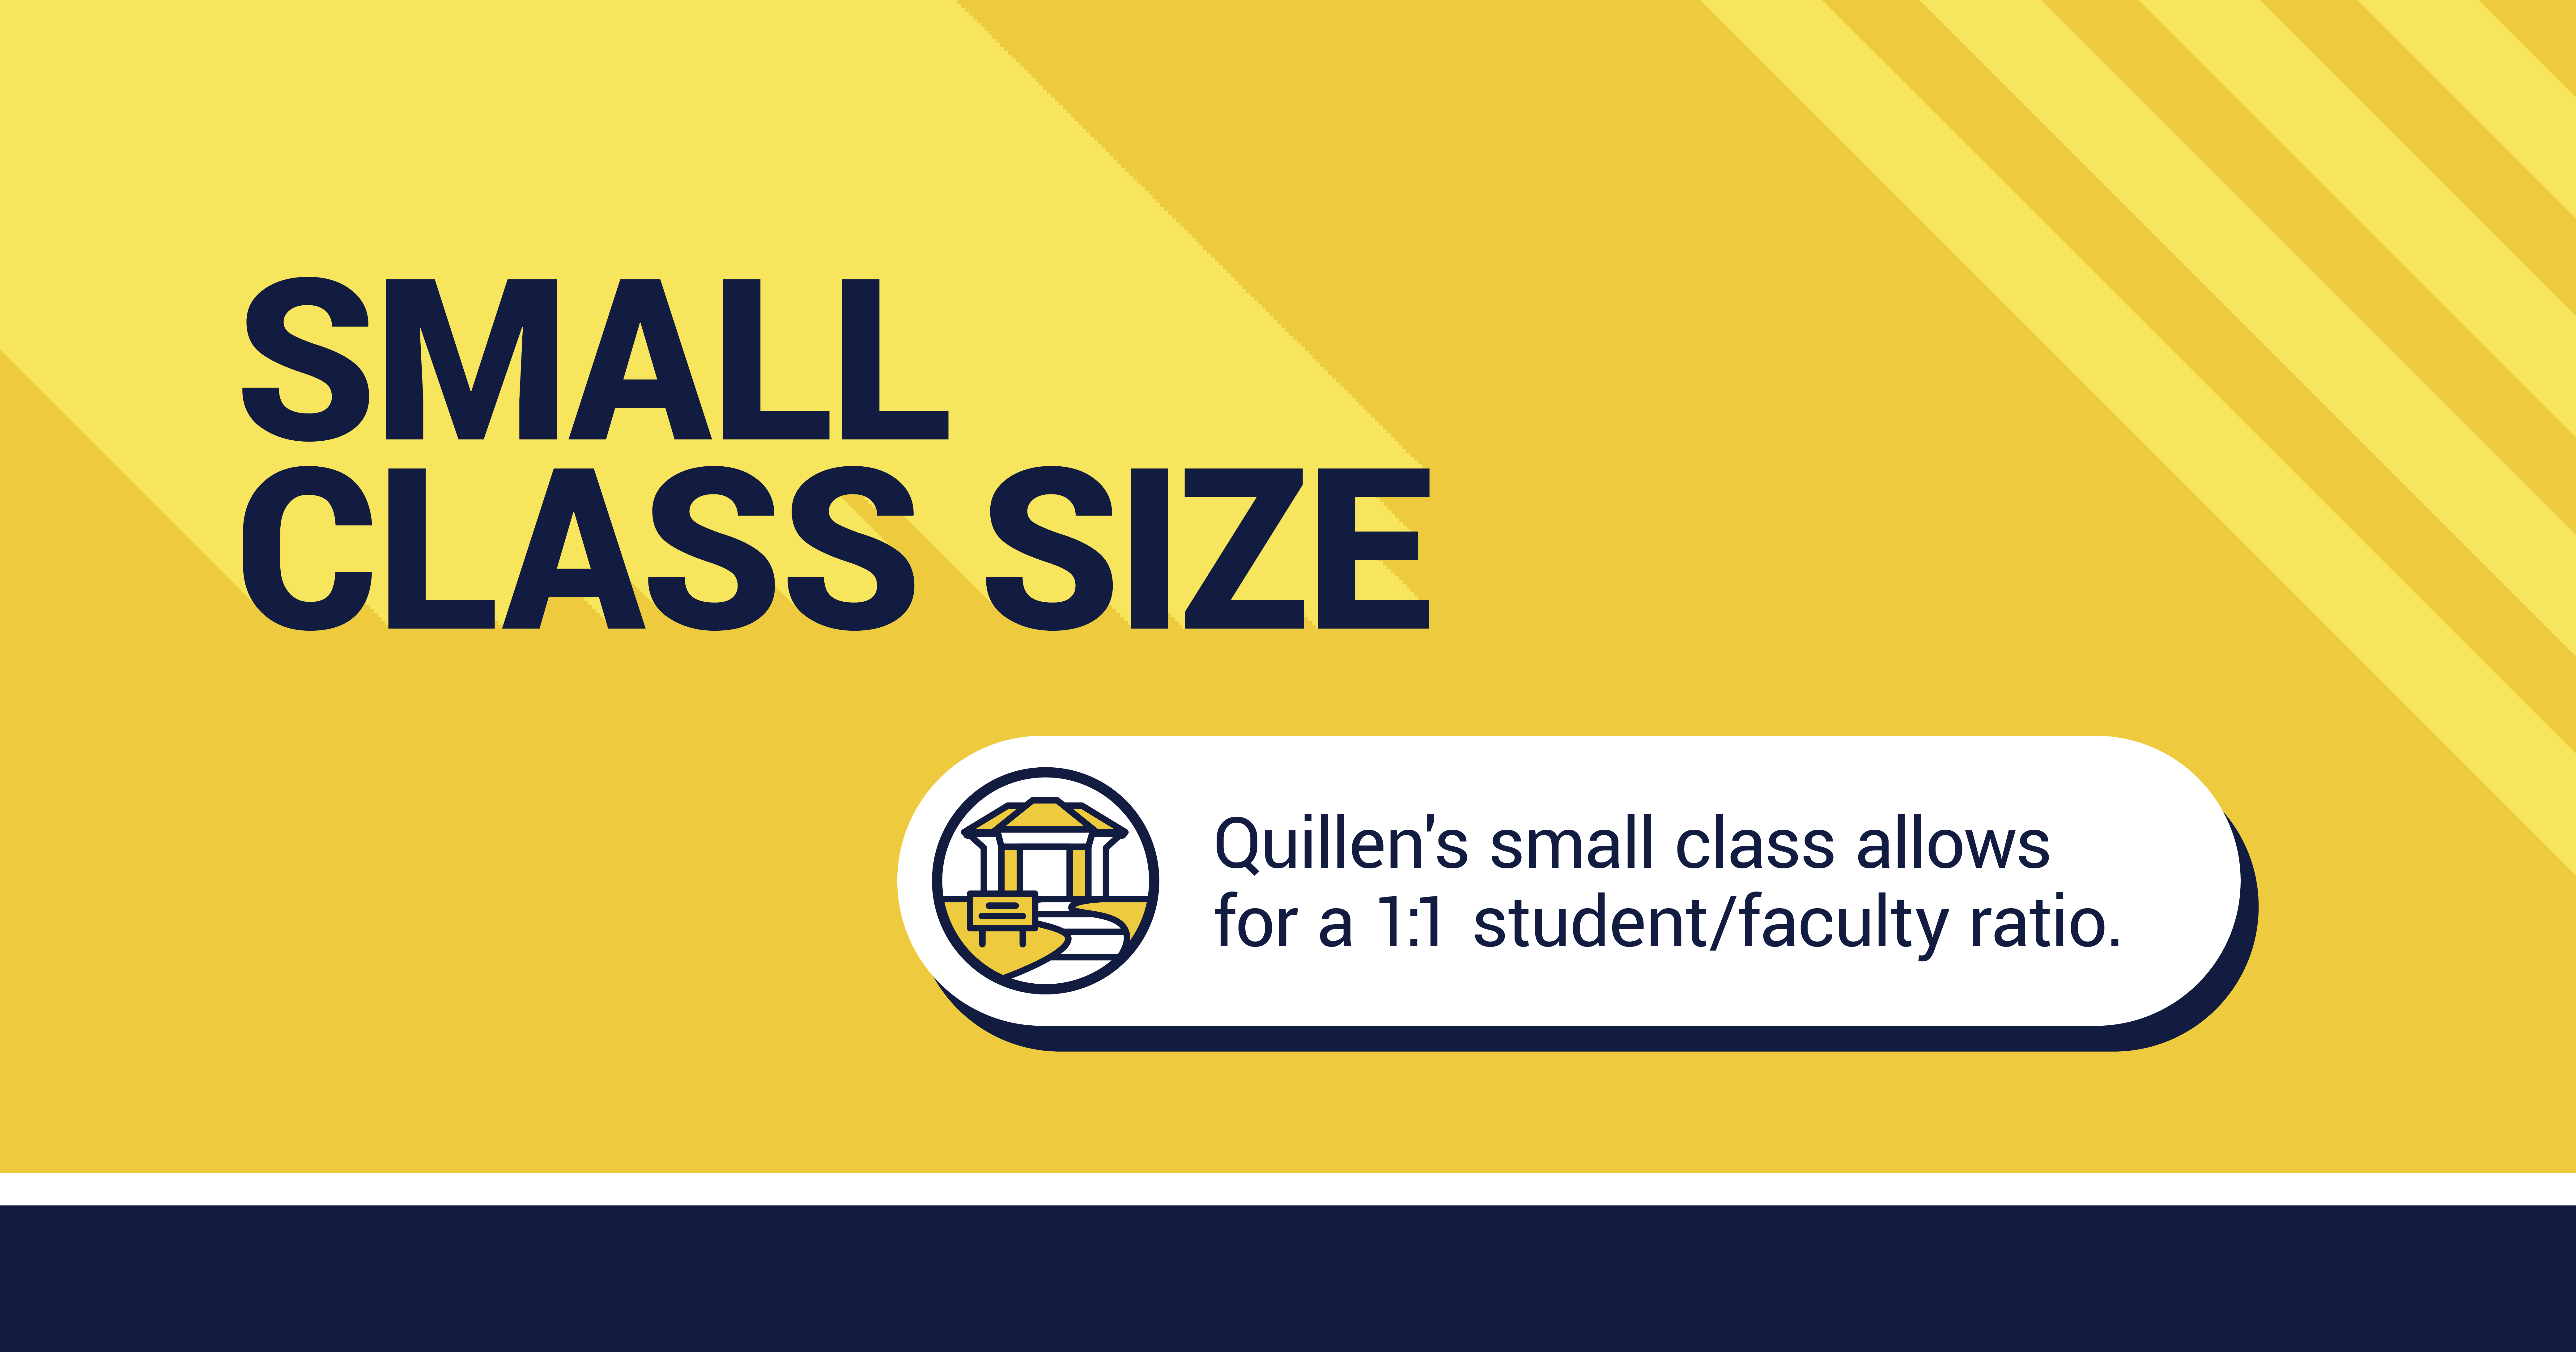 Quillan's small class allows for a 1:1 student/faculty ratio.